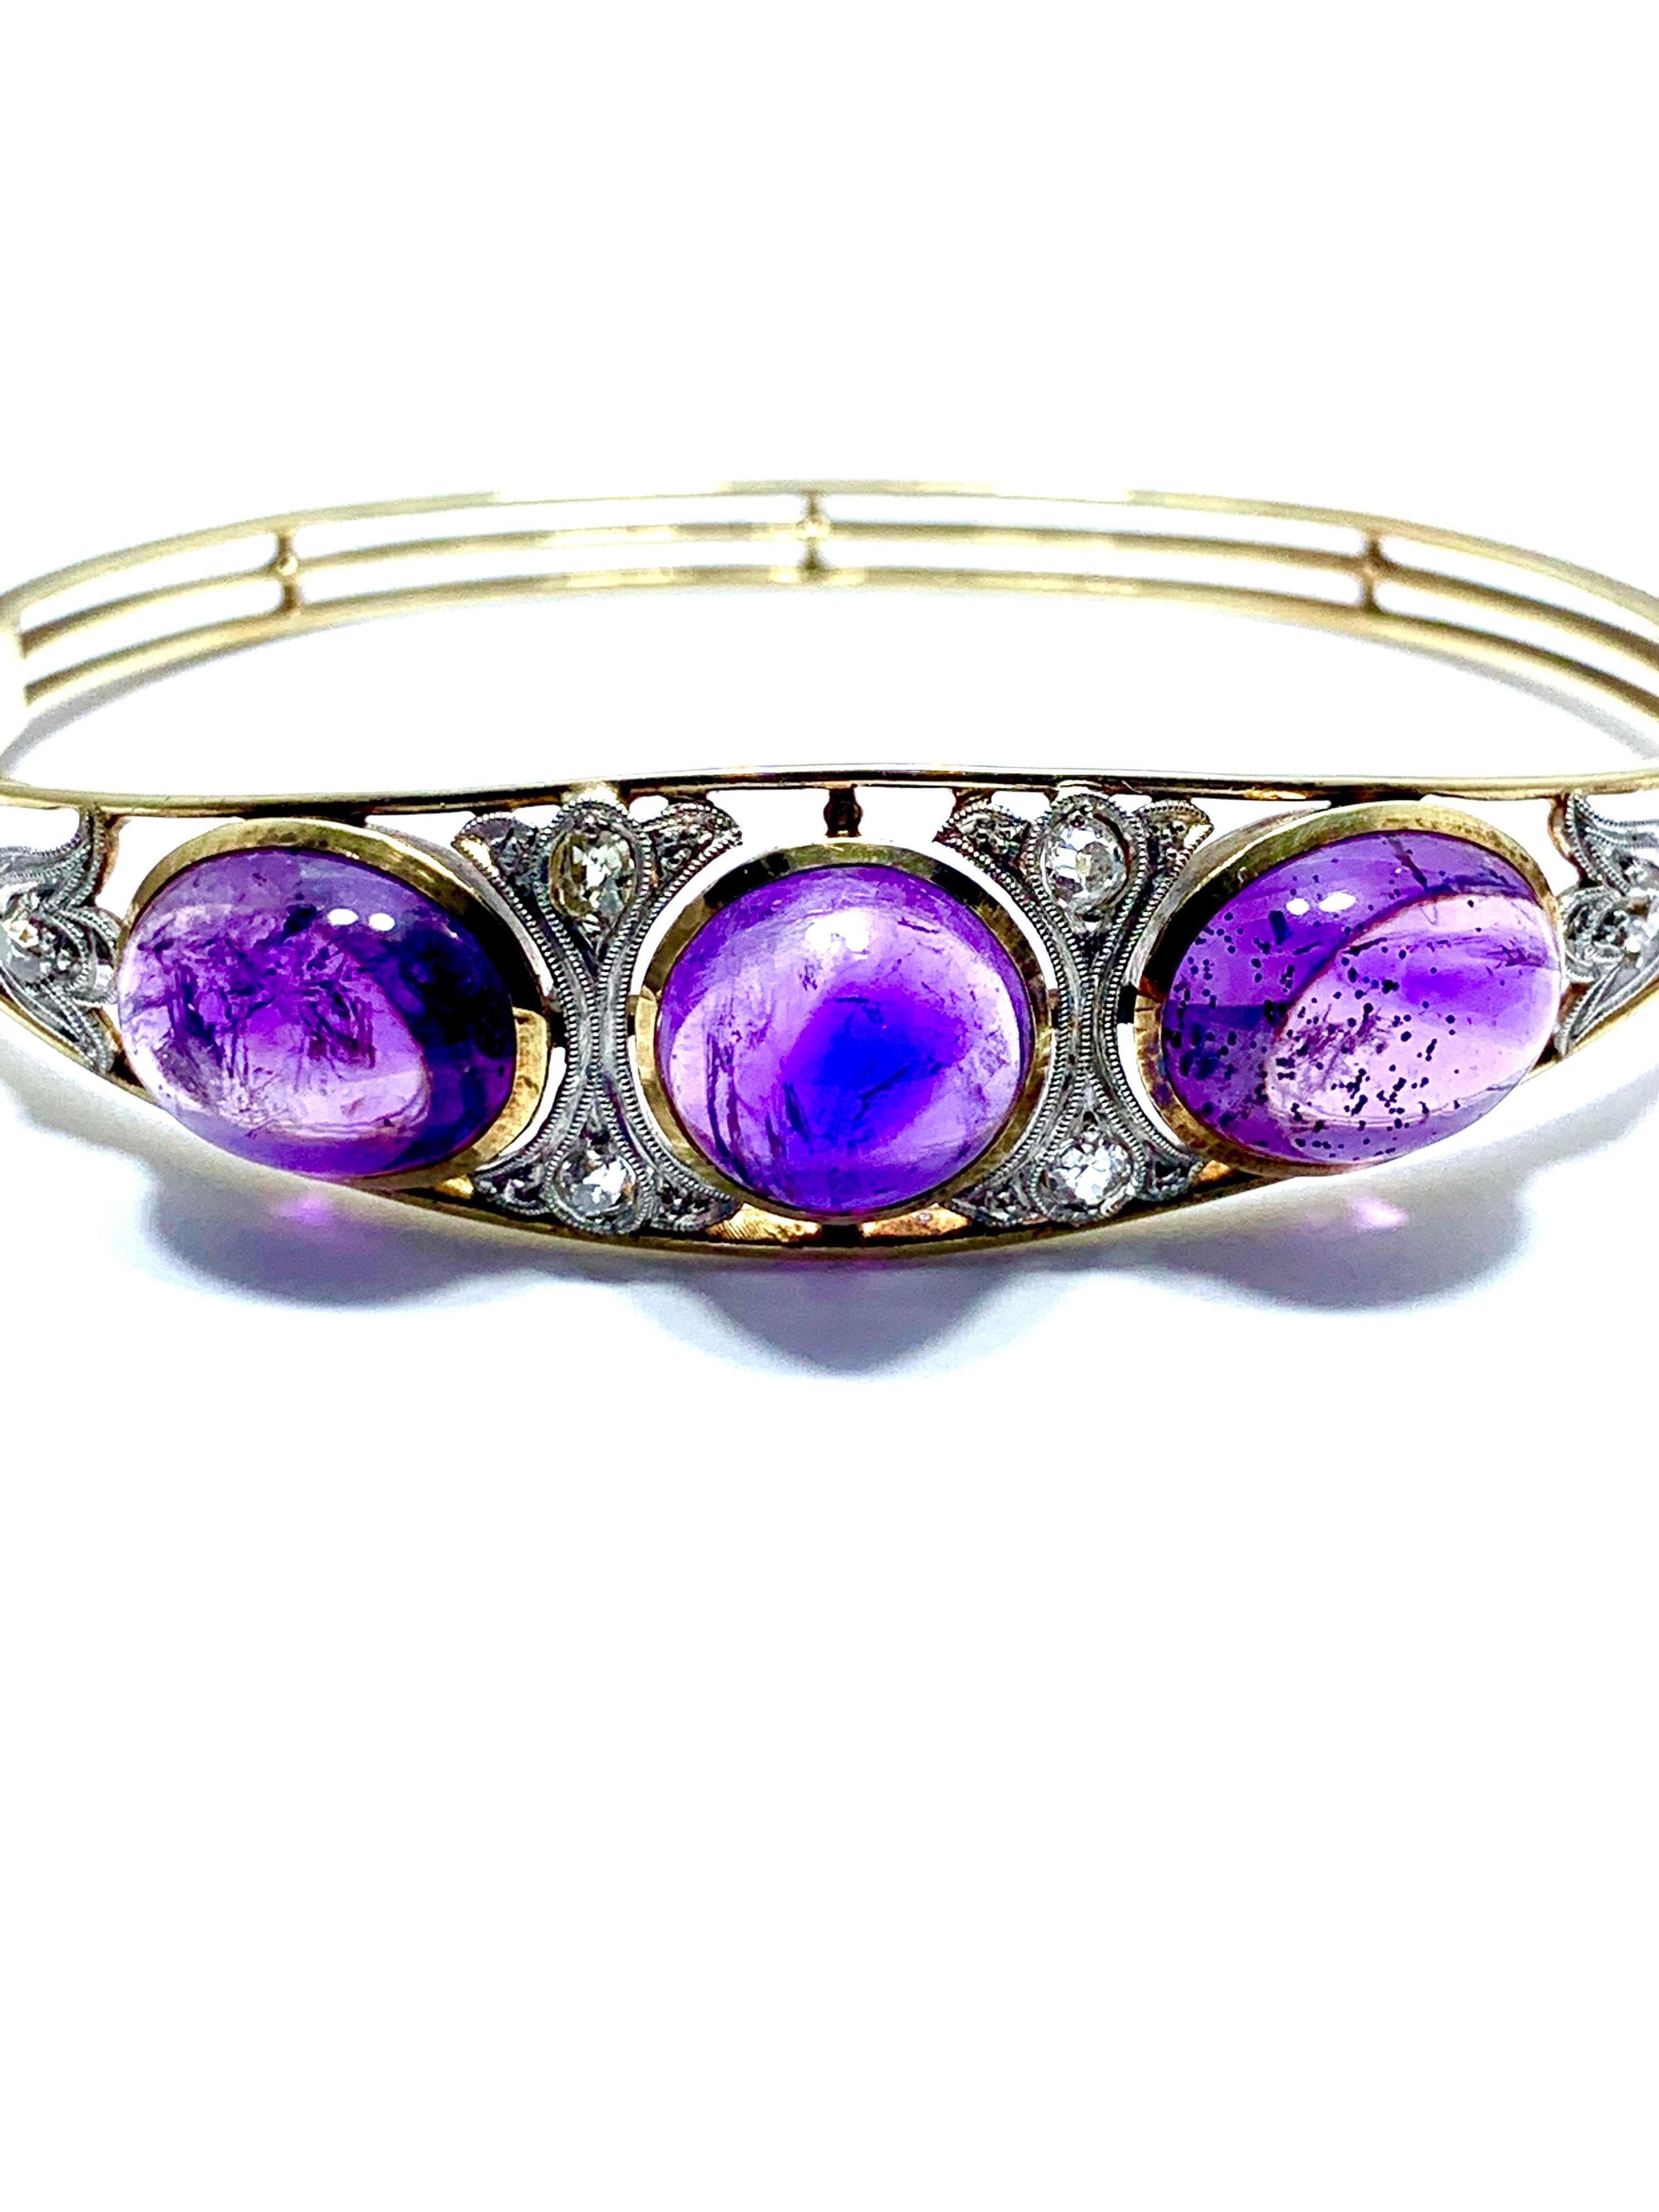 An amazing Art Deco Style cabochon Amethyst and Diamond bracelet!  The three cabochon Amethyst have a total weight of 15.60cts, and they are bezel set in 14K yellow gold, with white gold filigree and diamonds in between each stone.  The Amethyst and